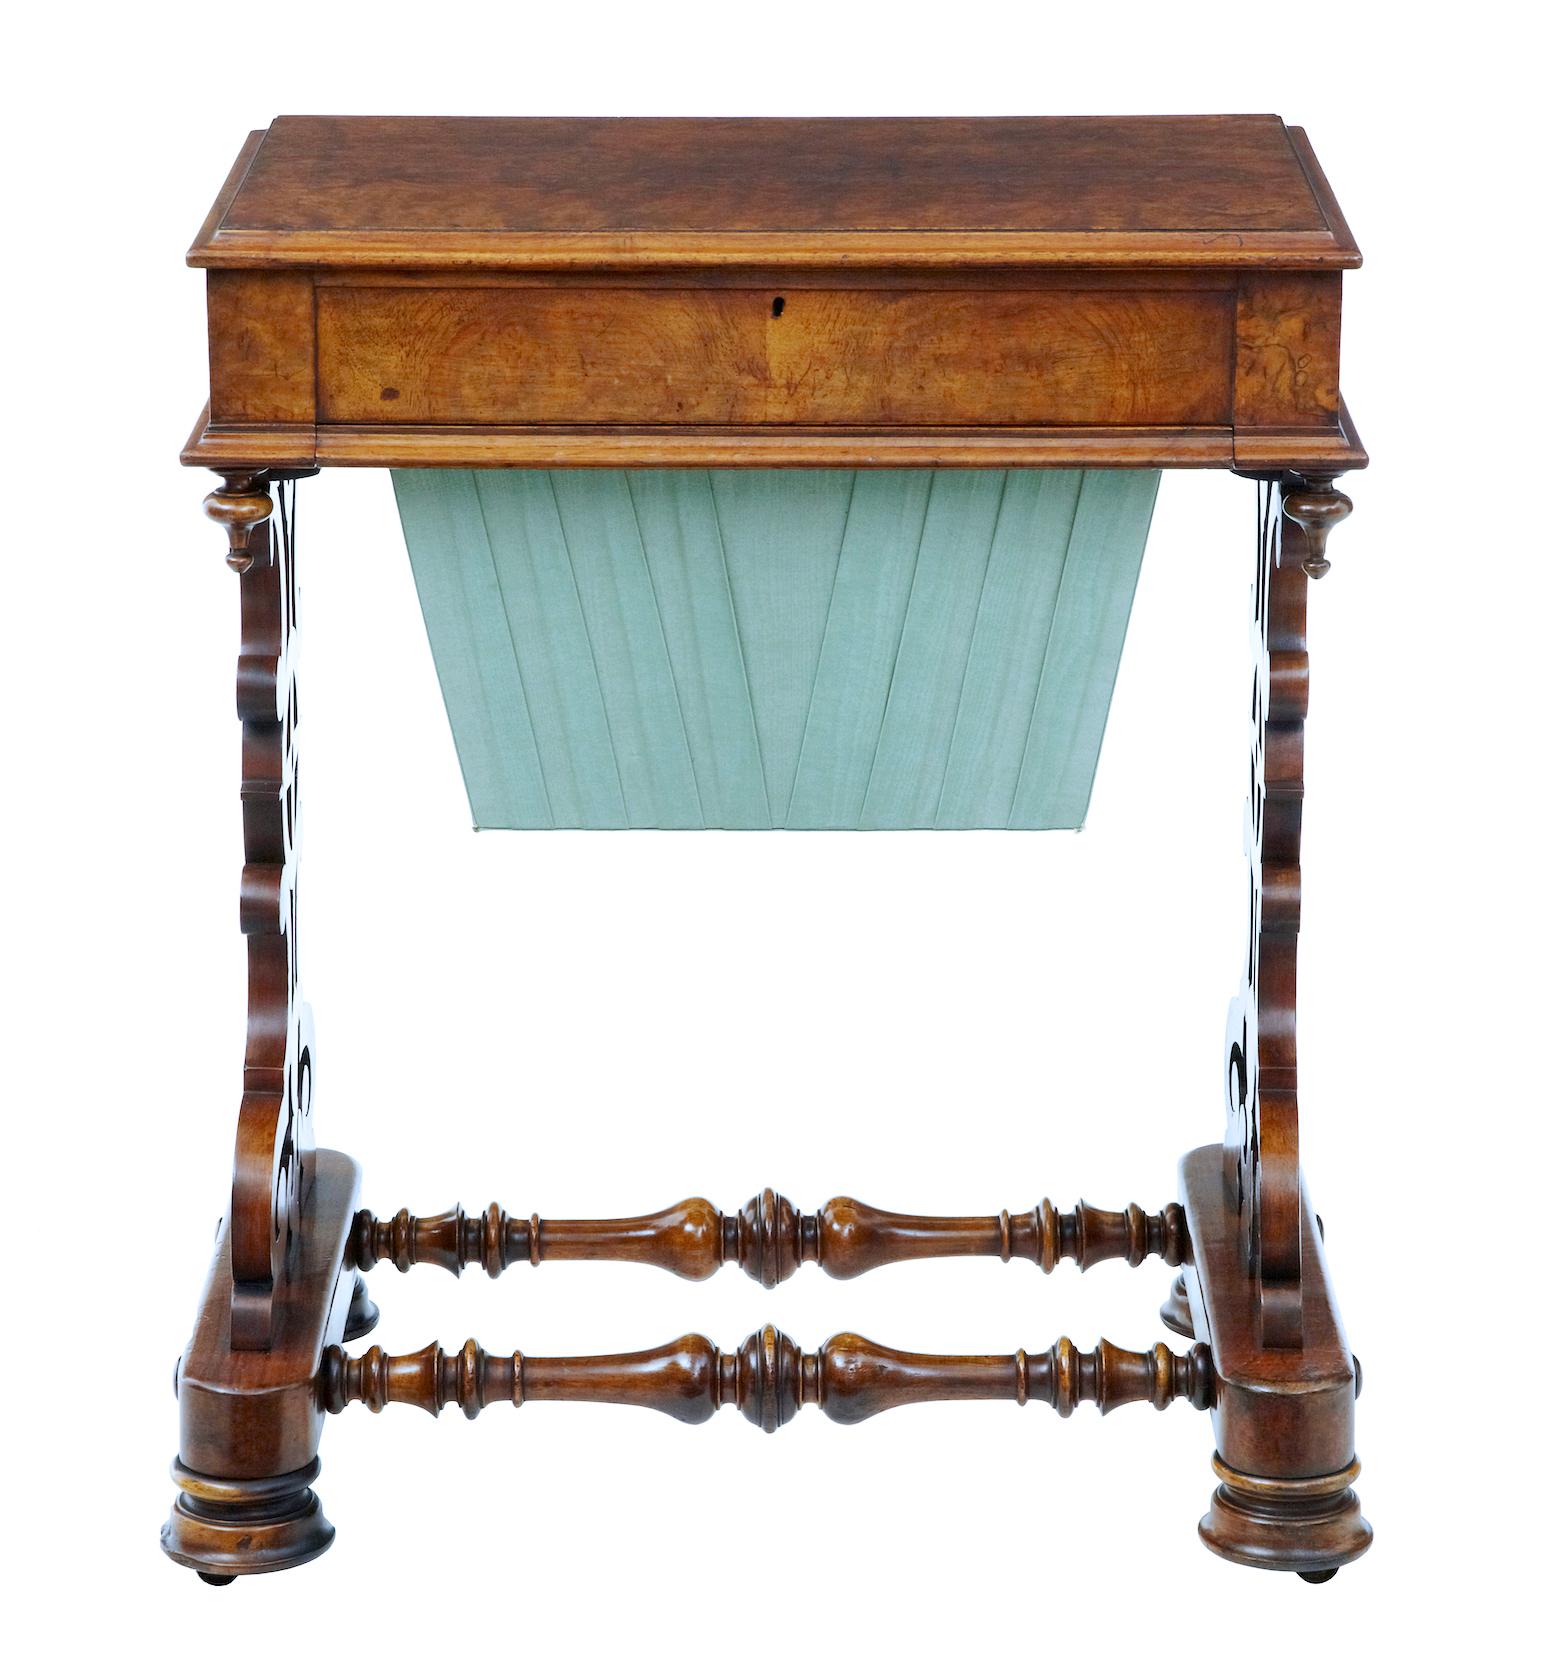 19th century burr walnut work occasional table circa 1870.

High Victorian ladies work table.
Beautiful walnut work table of good color and patina.
Satinwood interior with fretwork covered compartments.
The interior is echoed by the fretwork